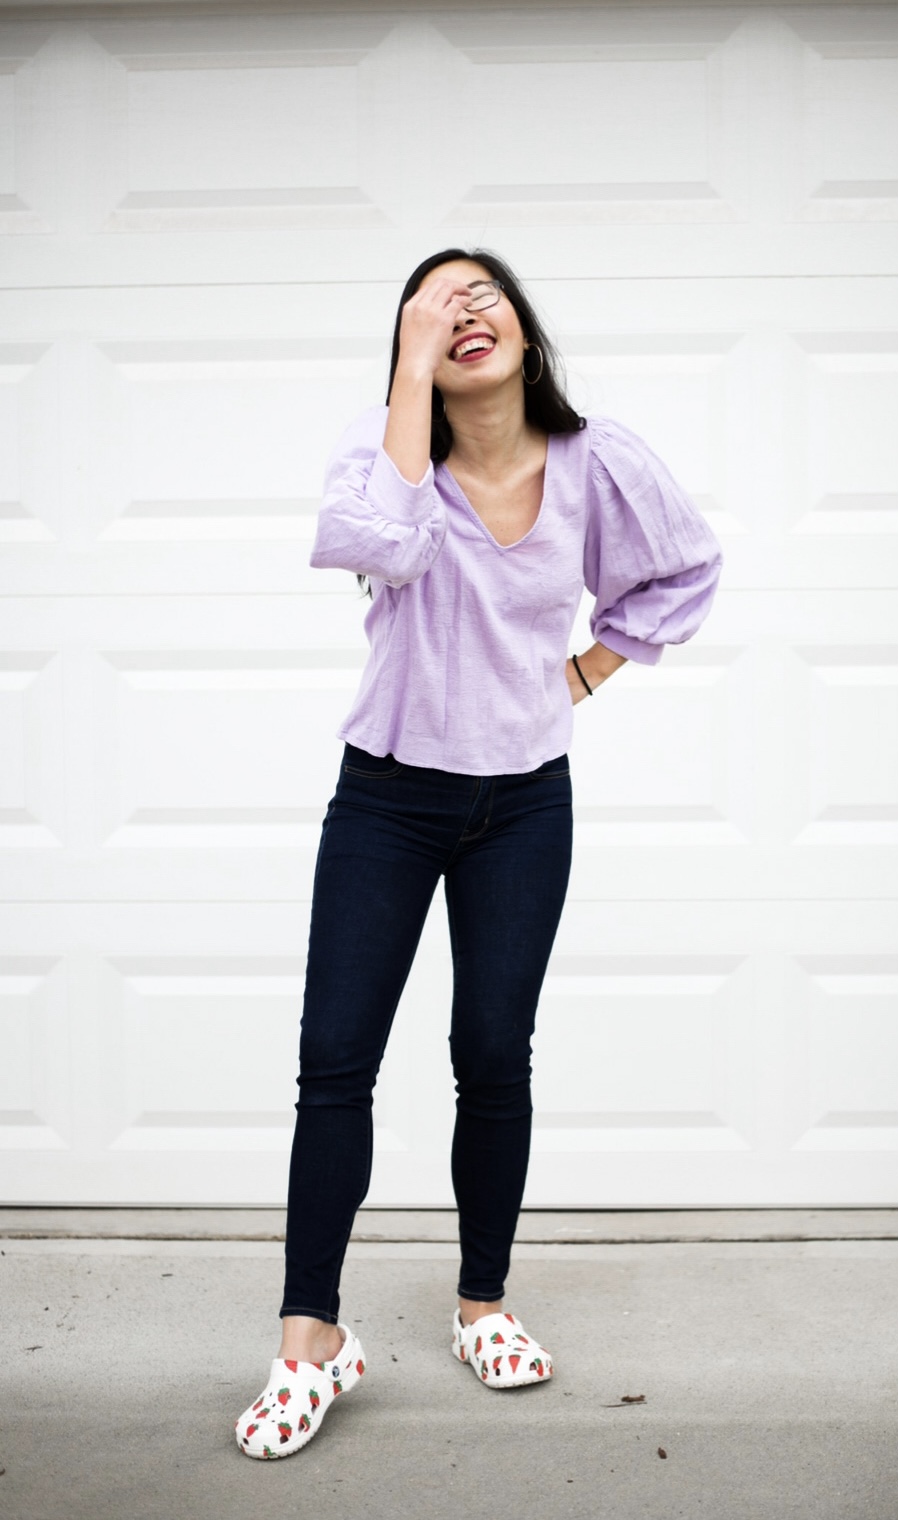 An Asian woman with long hair is laughing while touching her face. She's wearing a lilac peplum top, jeans, and strawberry crocs.